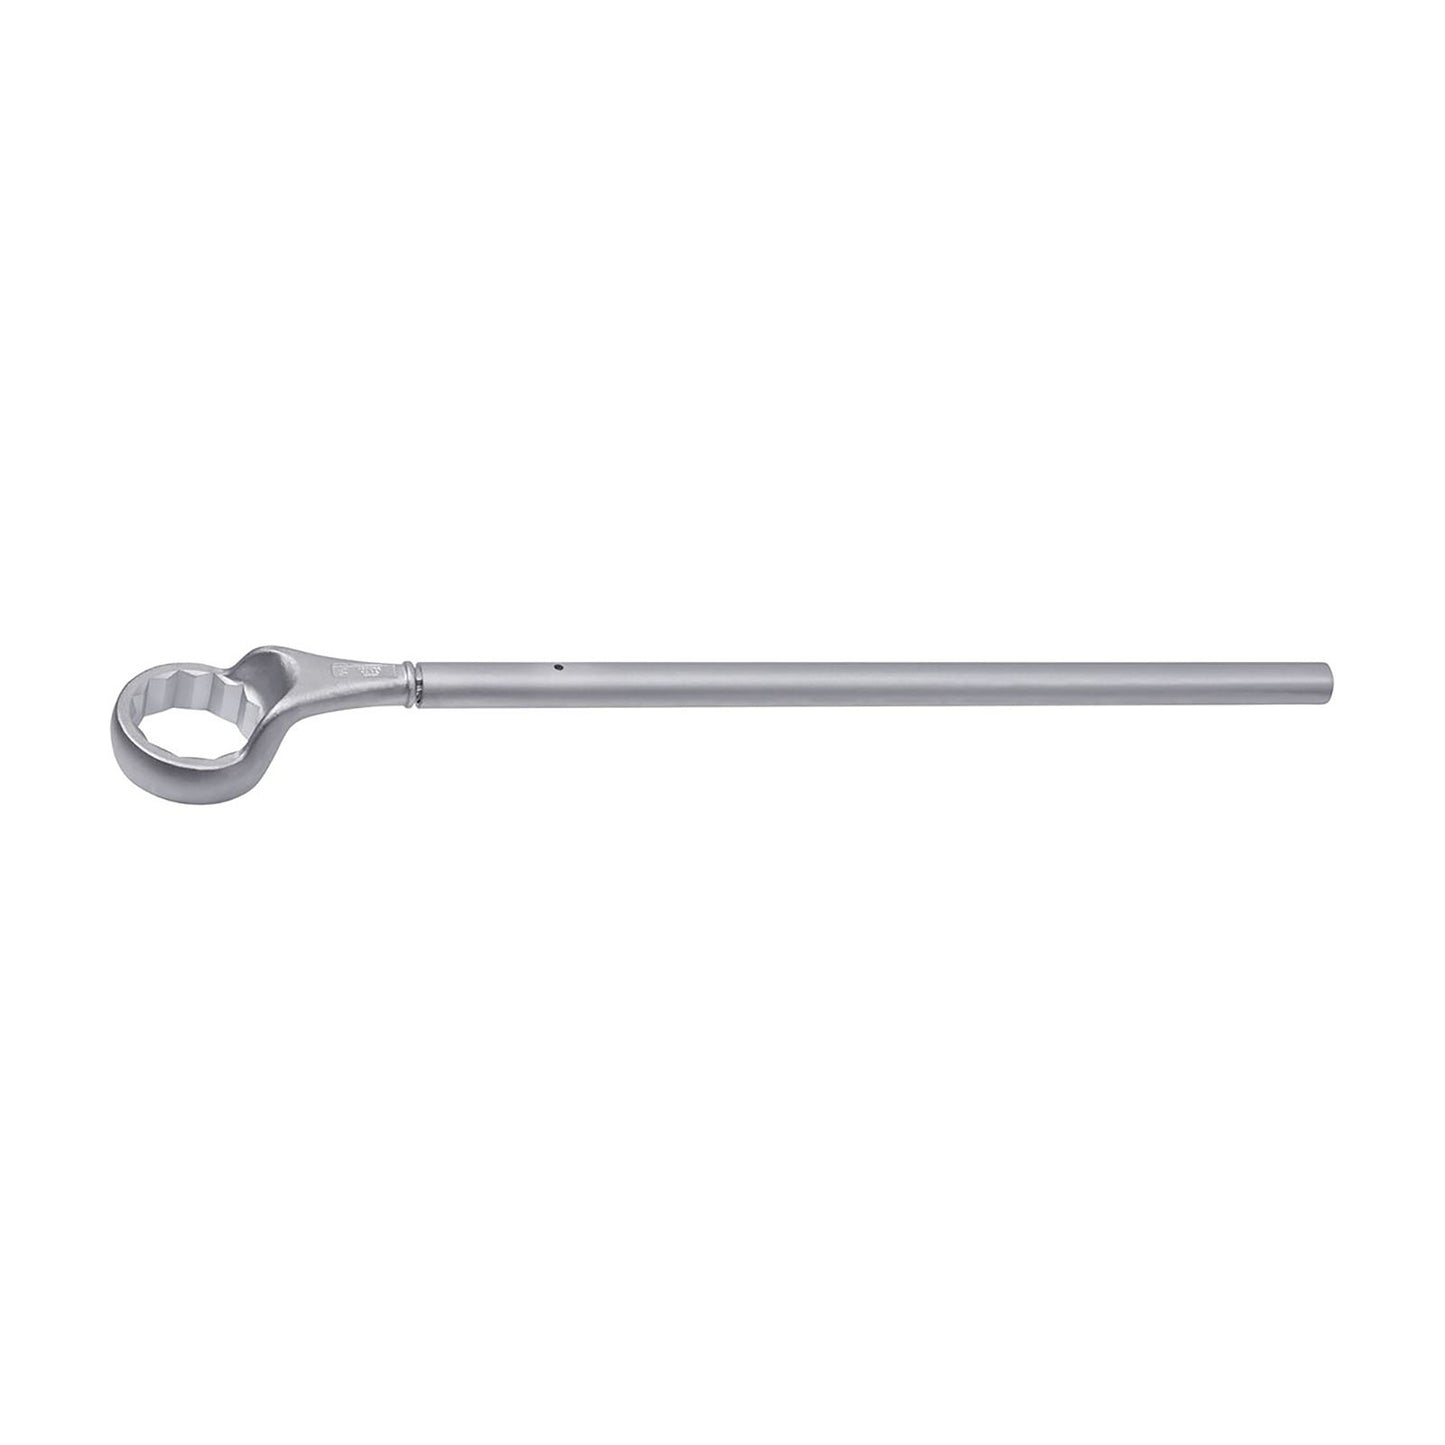 GEDORE 2 A 50 - Traction Wrench, 50mm (6034570)